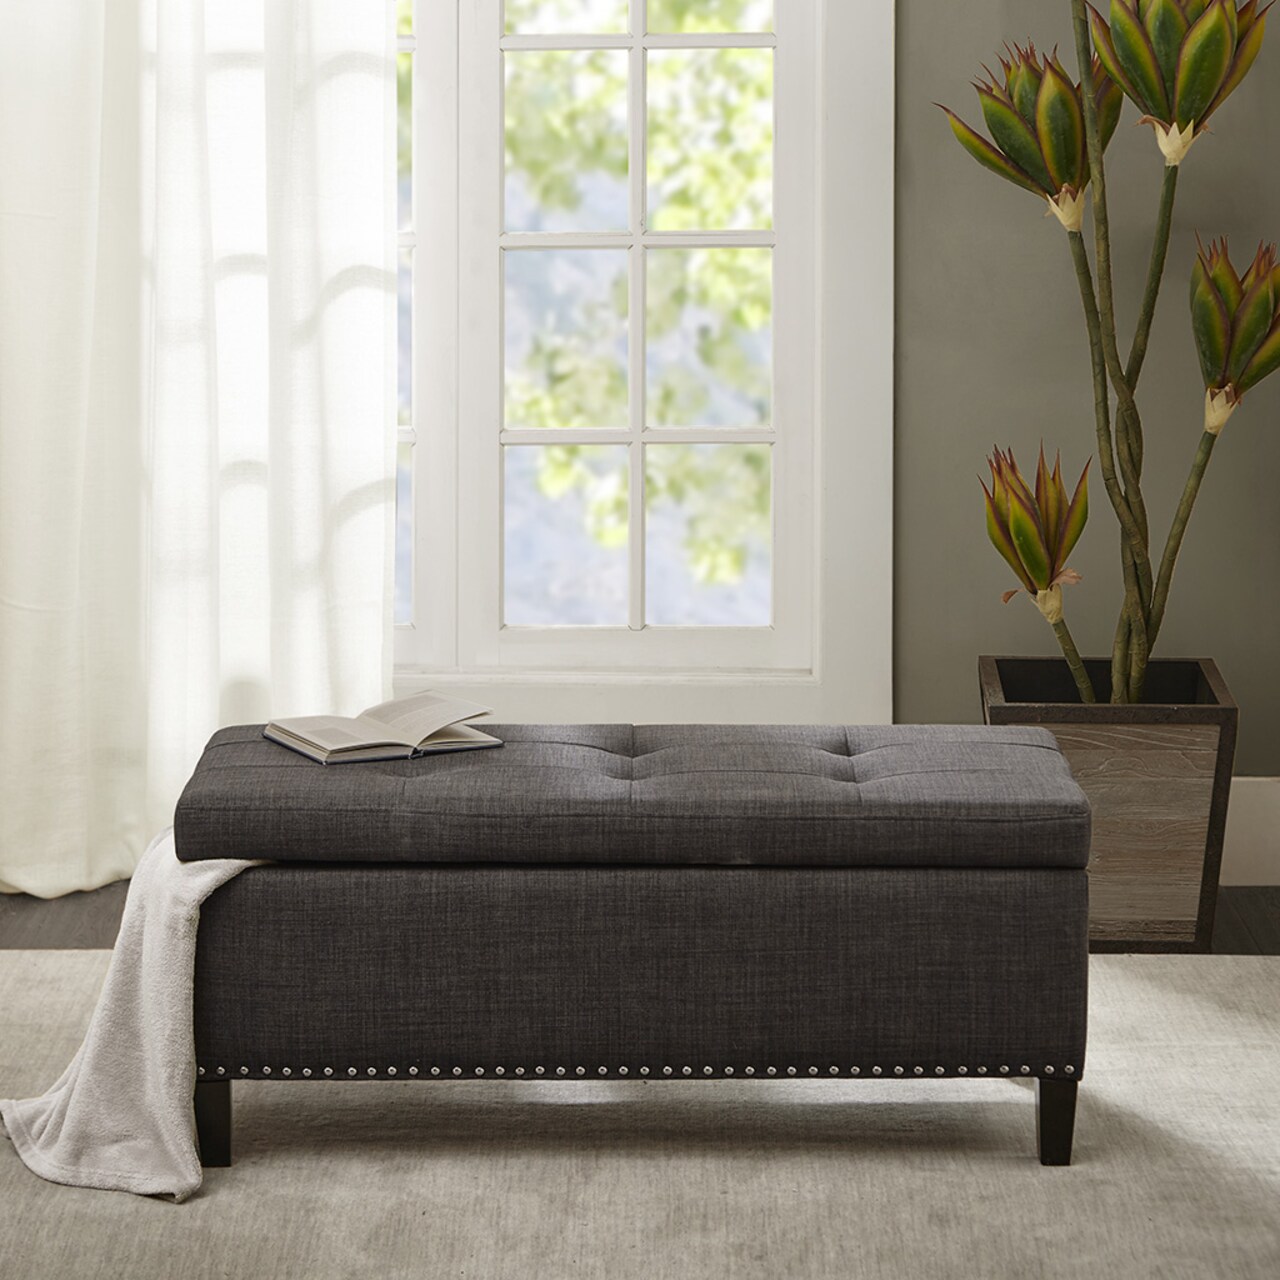 Gracie Mills   Tufted Top Soft Close Storage Bench - GRACE-3951